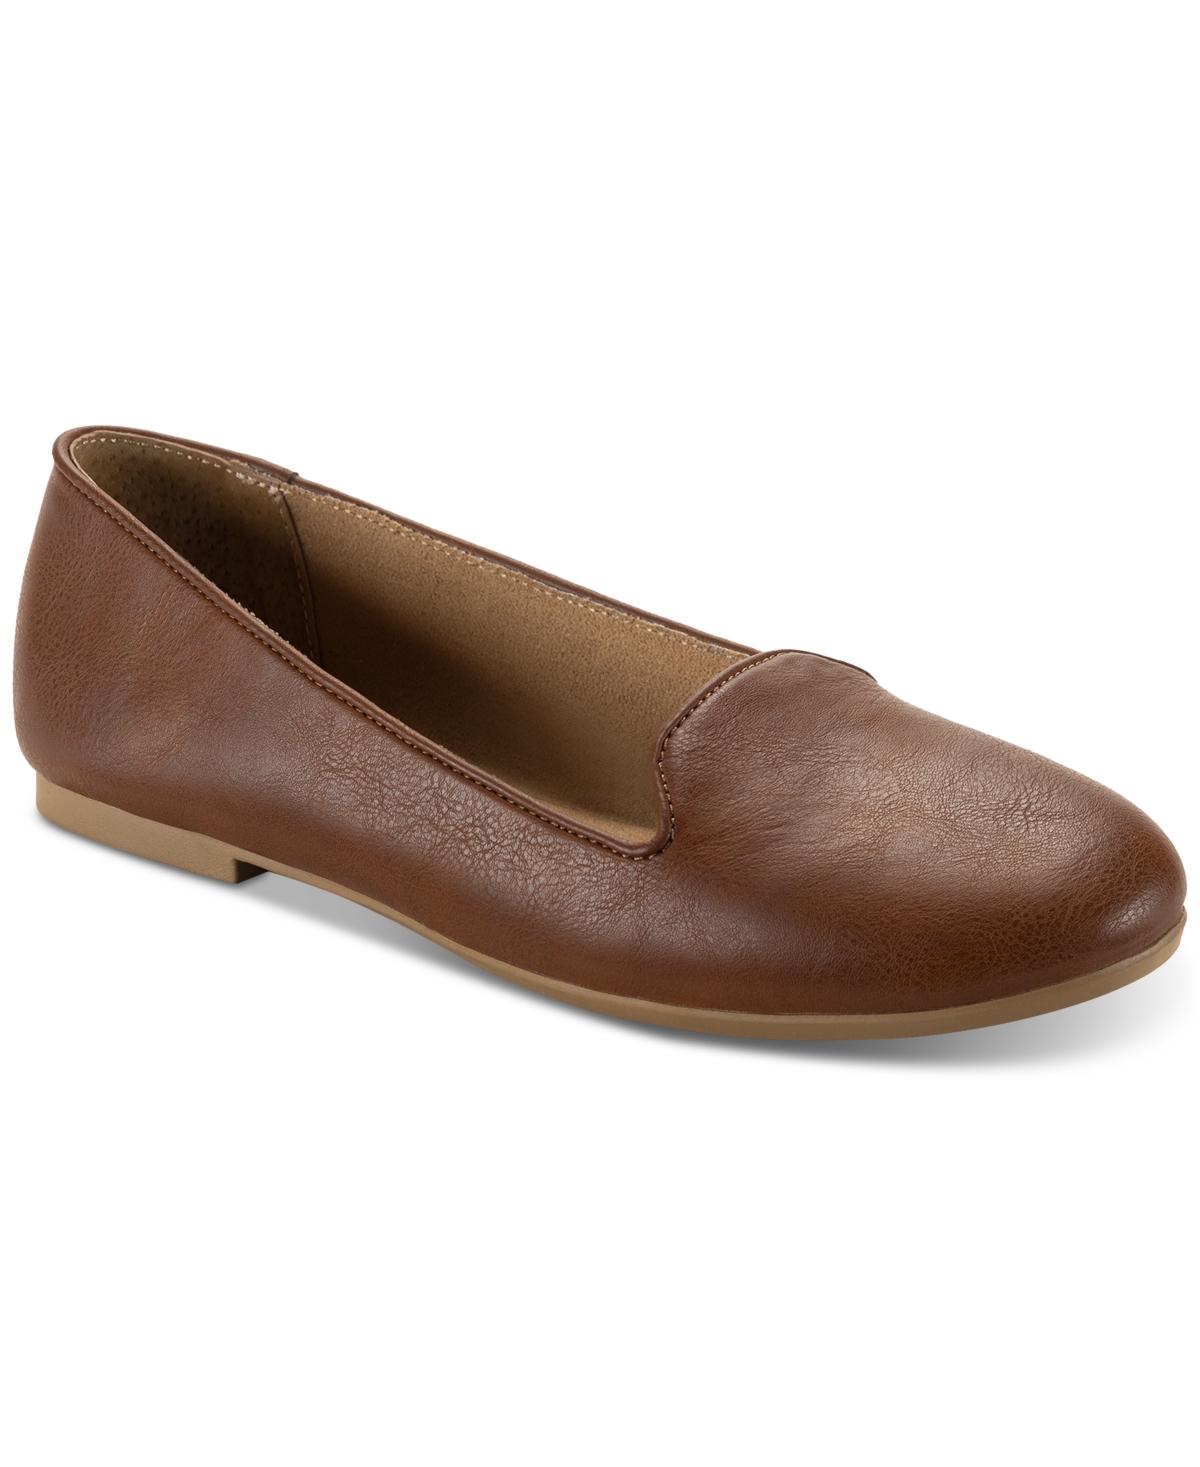 STYLE & CO ALYSON SLIP-ON LOAFER FLATS, CREATED FOR MACY'S